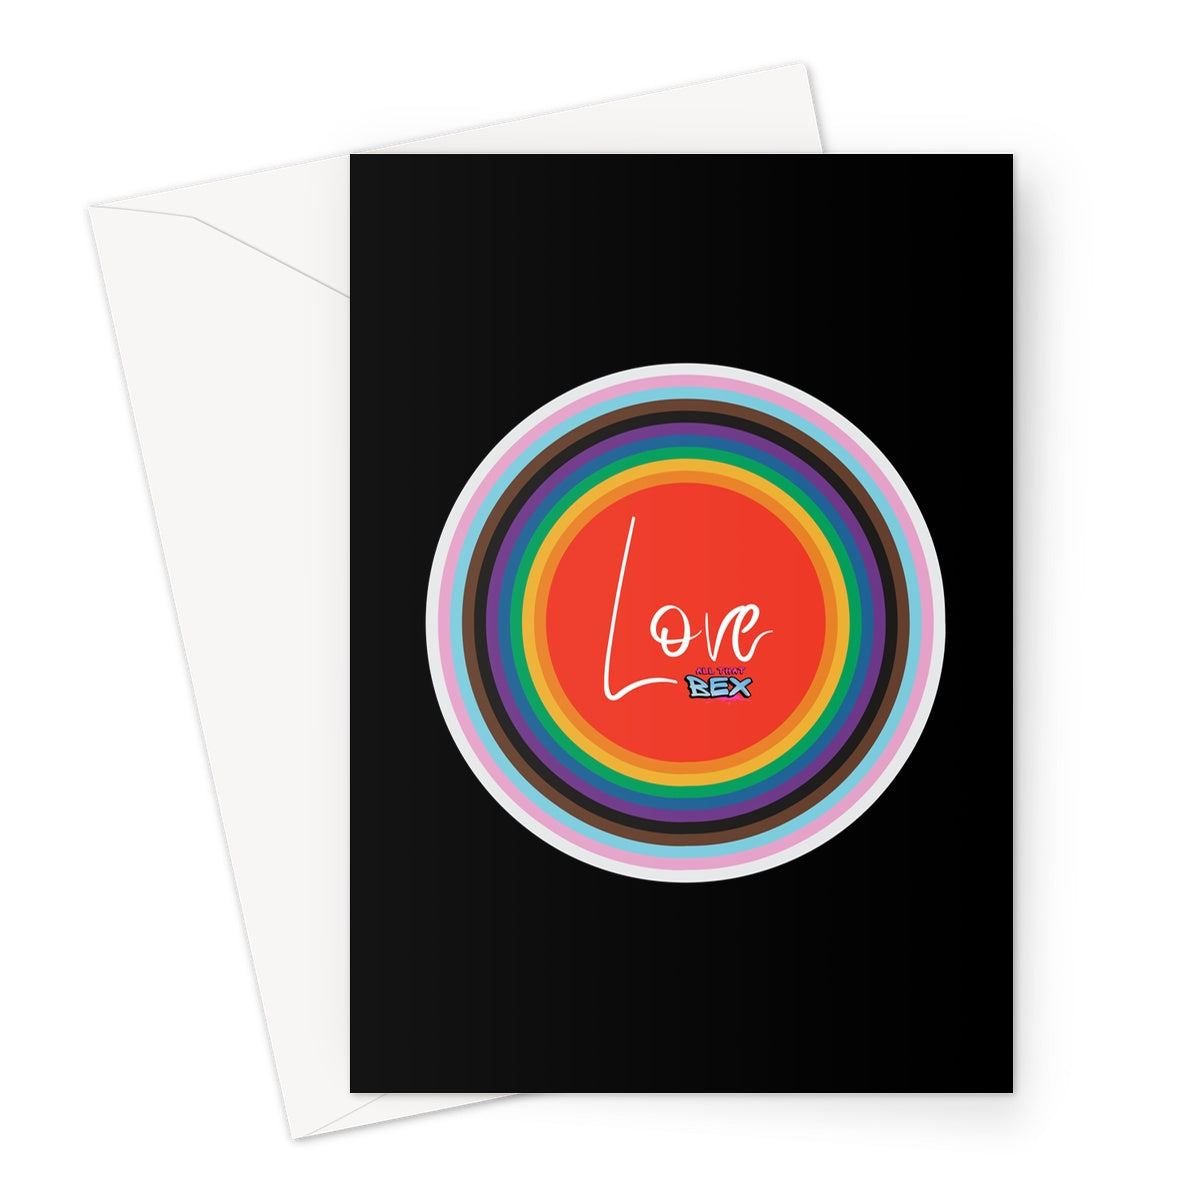 Blank greeting card with black background. On the blank card are eleven different coloured circles on top of one another with the rim of each shown, similar to a target. The centre is red and has the word 'Love' written in a white. The All That Bex logo is next to it. The colours from inside out represent the LGBTQIA pride flag with the rainbow, black and brown, and trans pink, blue, and white.